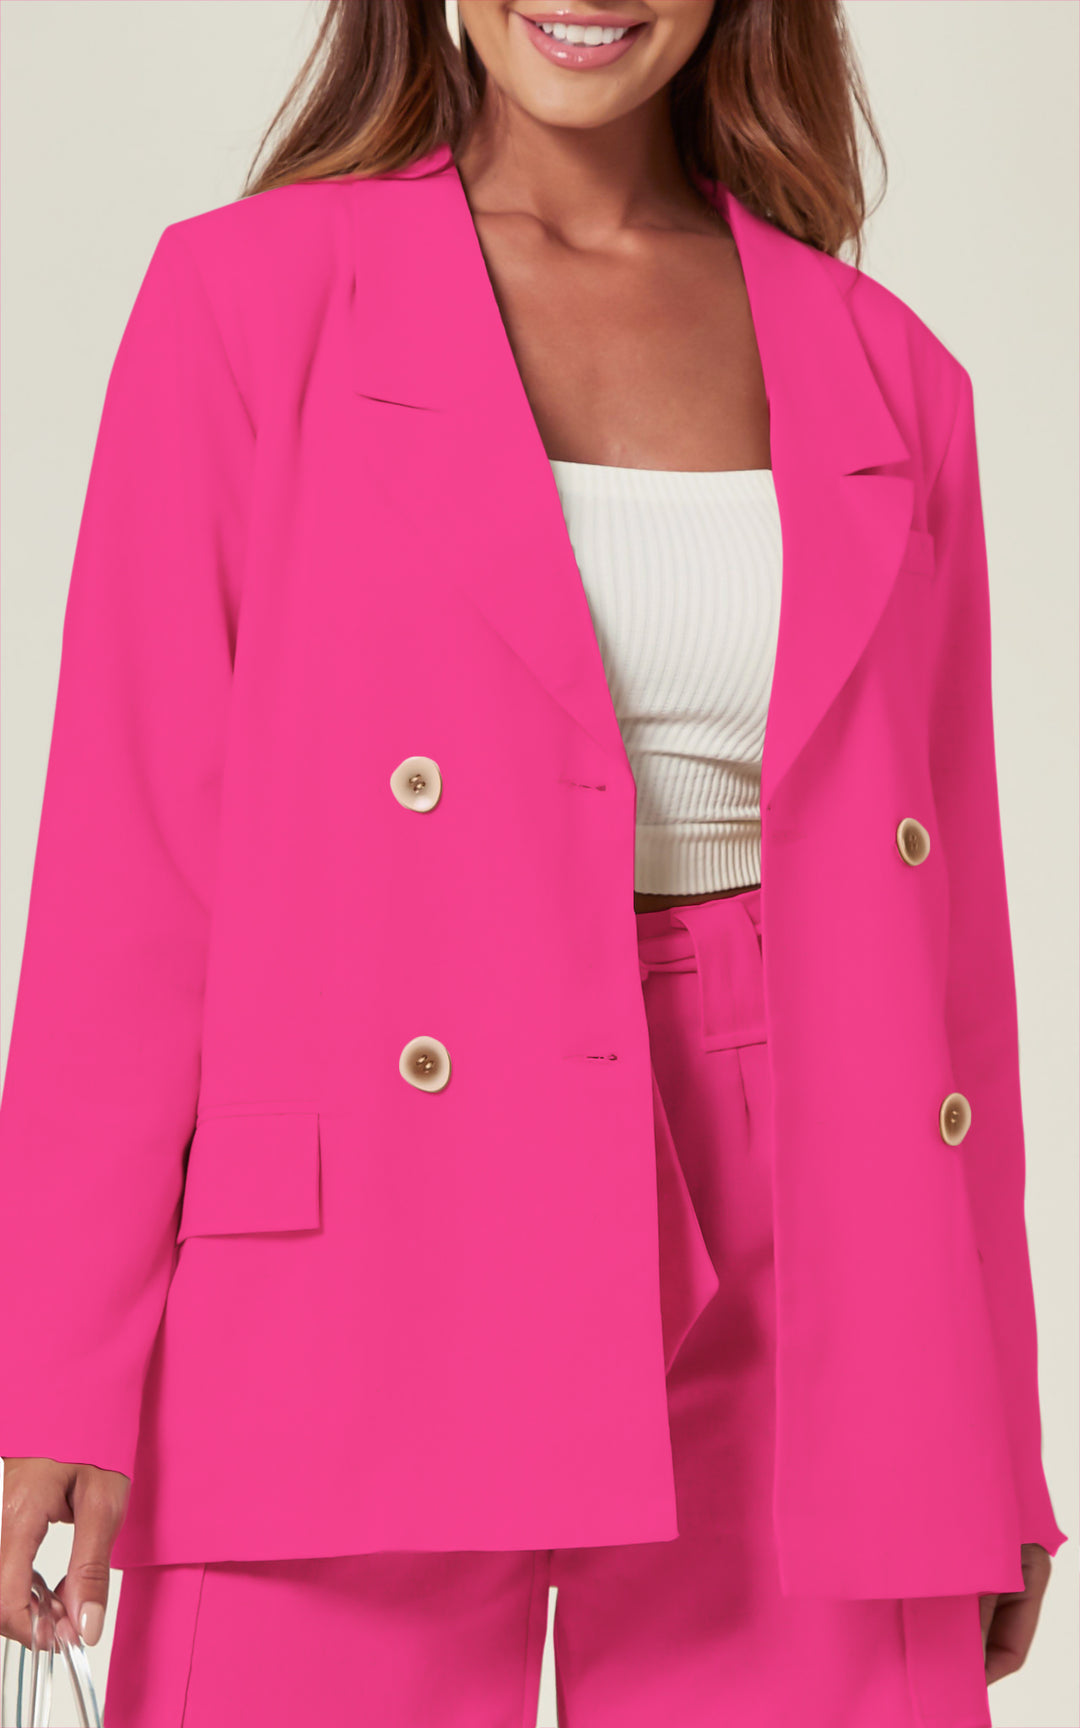 Tailored Double Breasted Blazer Jacket In Hot Pink